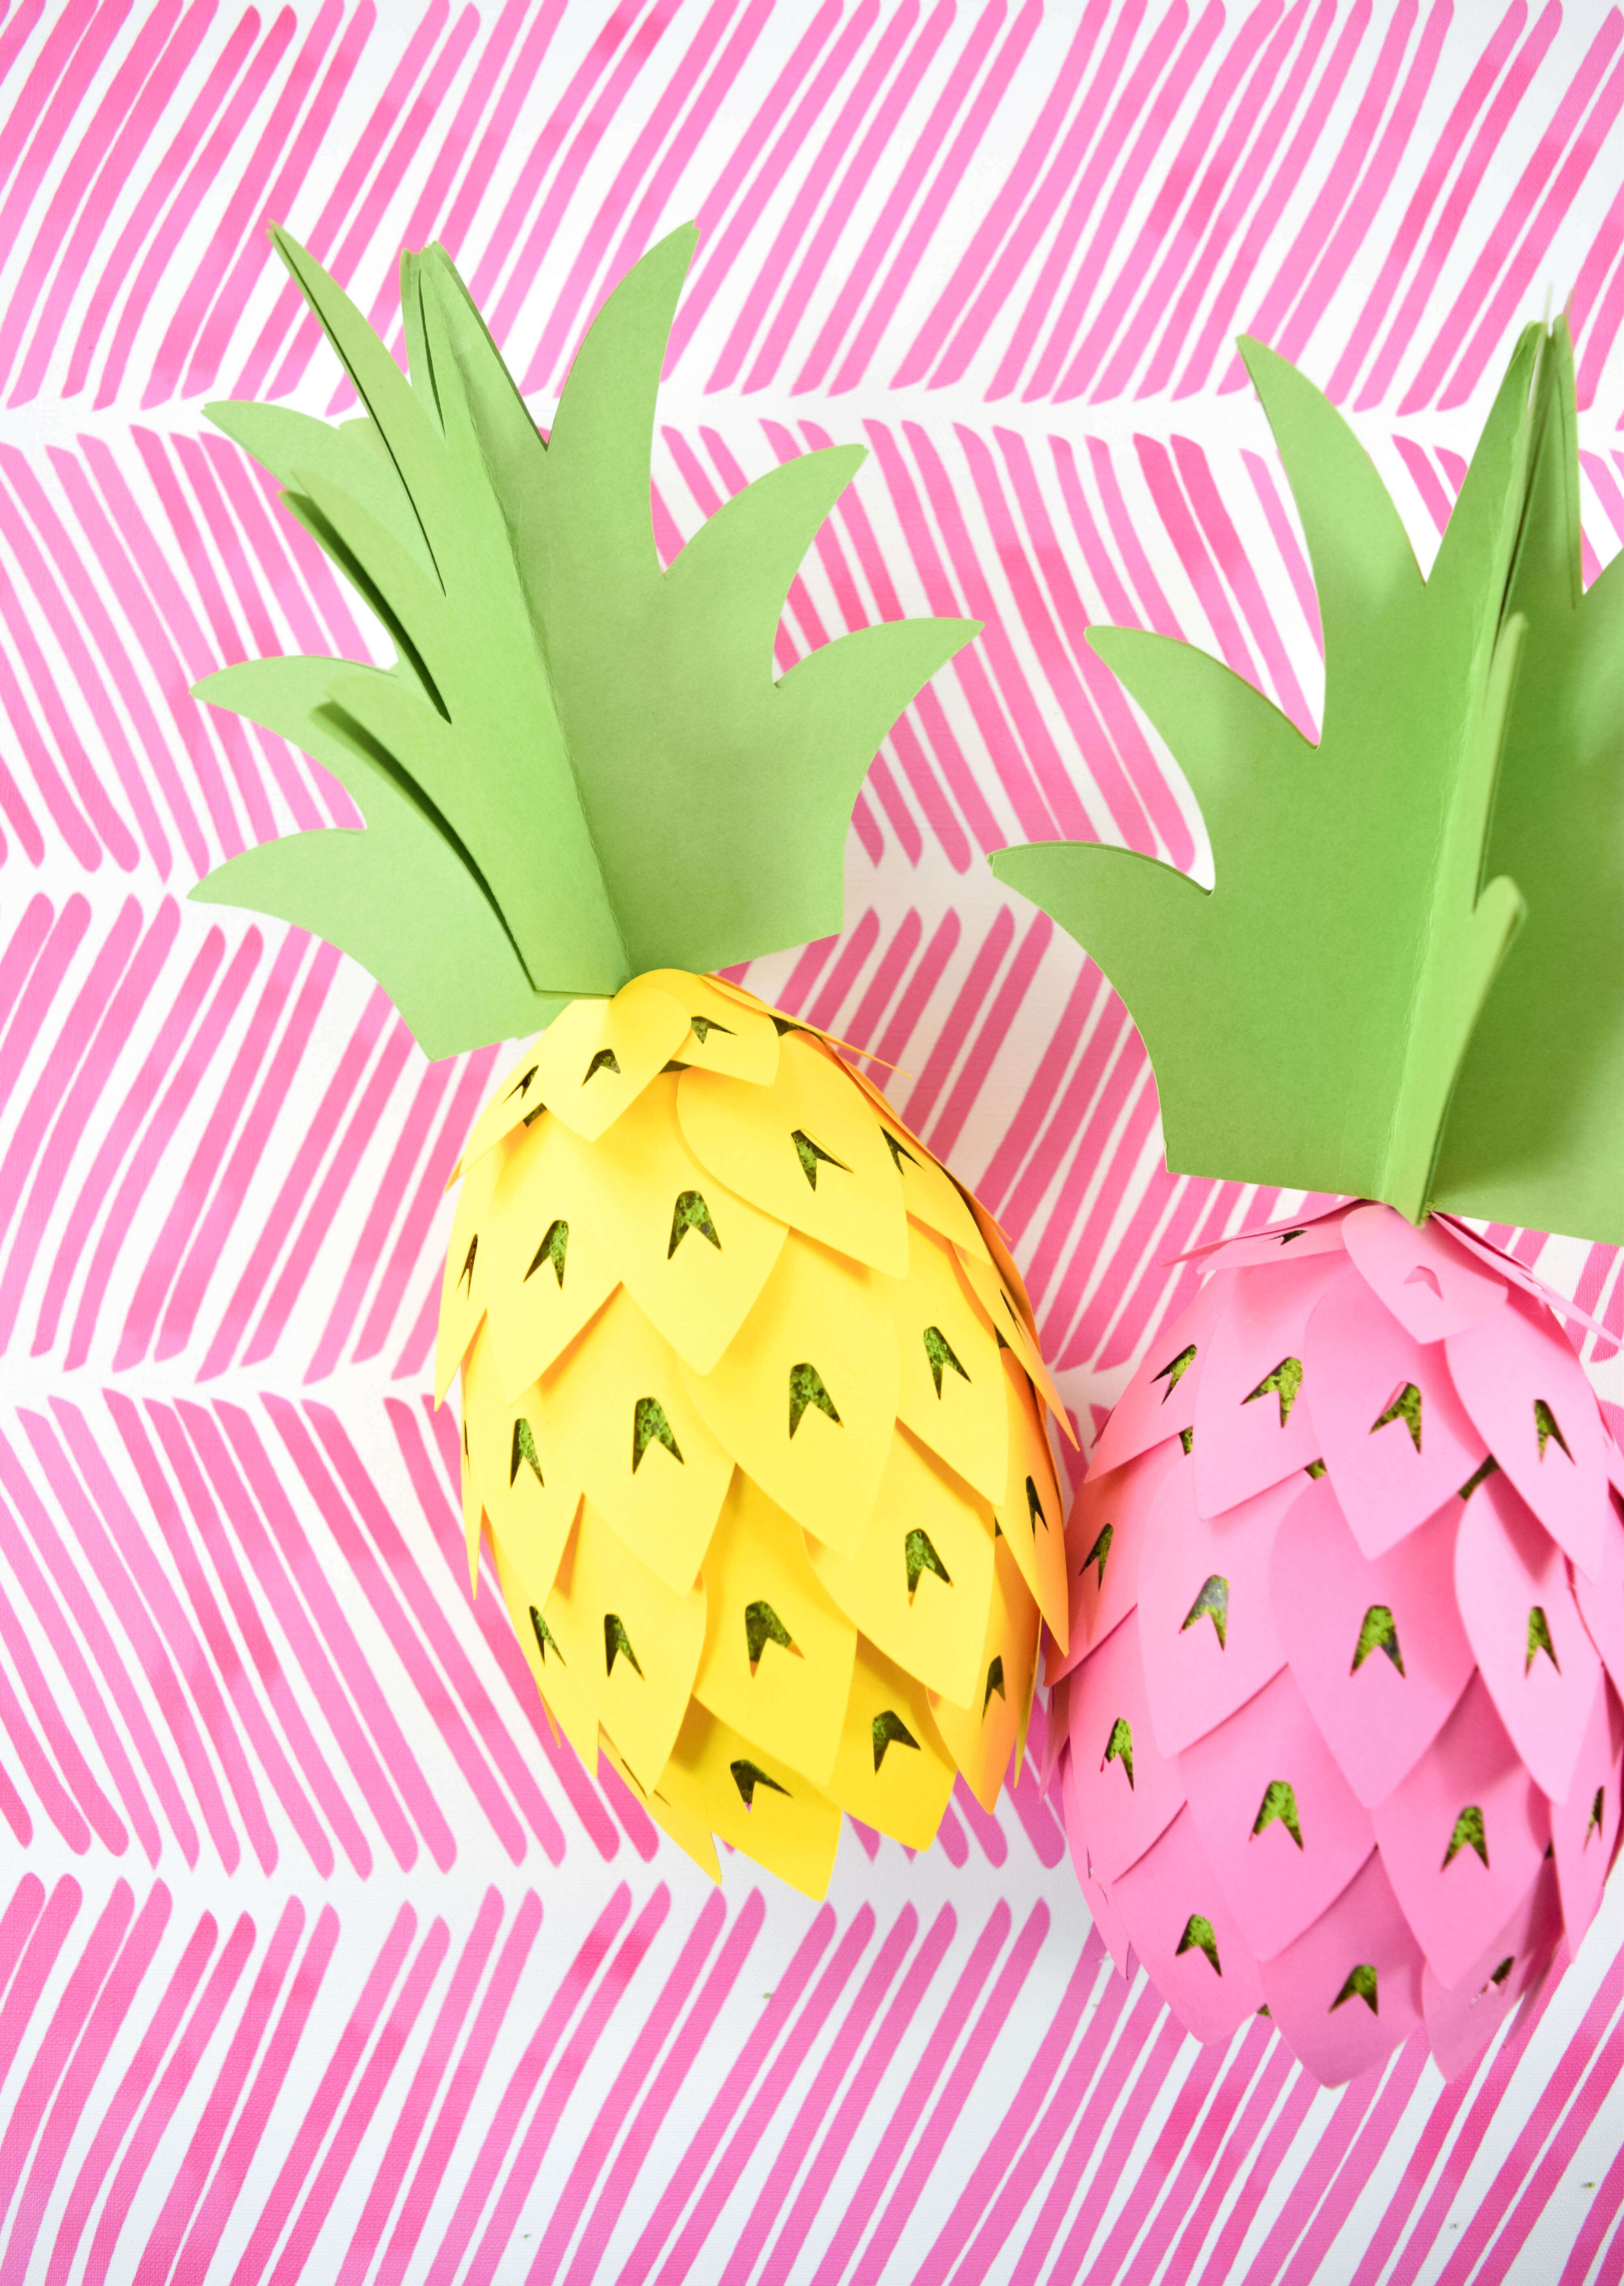 How to Make Paper Pineapple Party Decorations: DIY Paper Pineapple Template